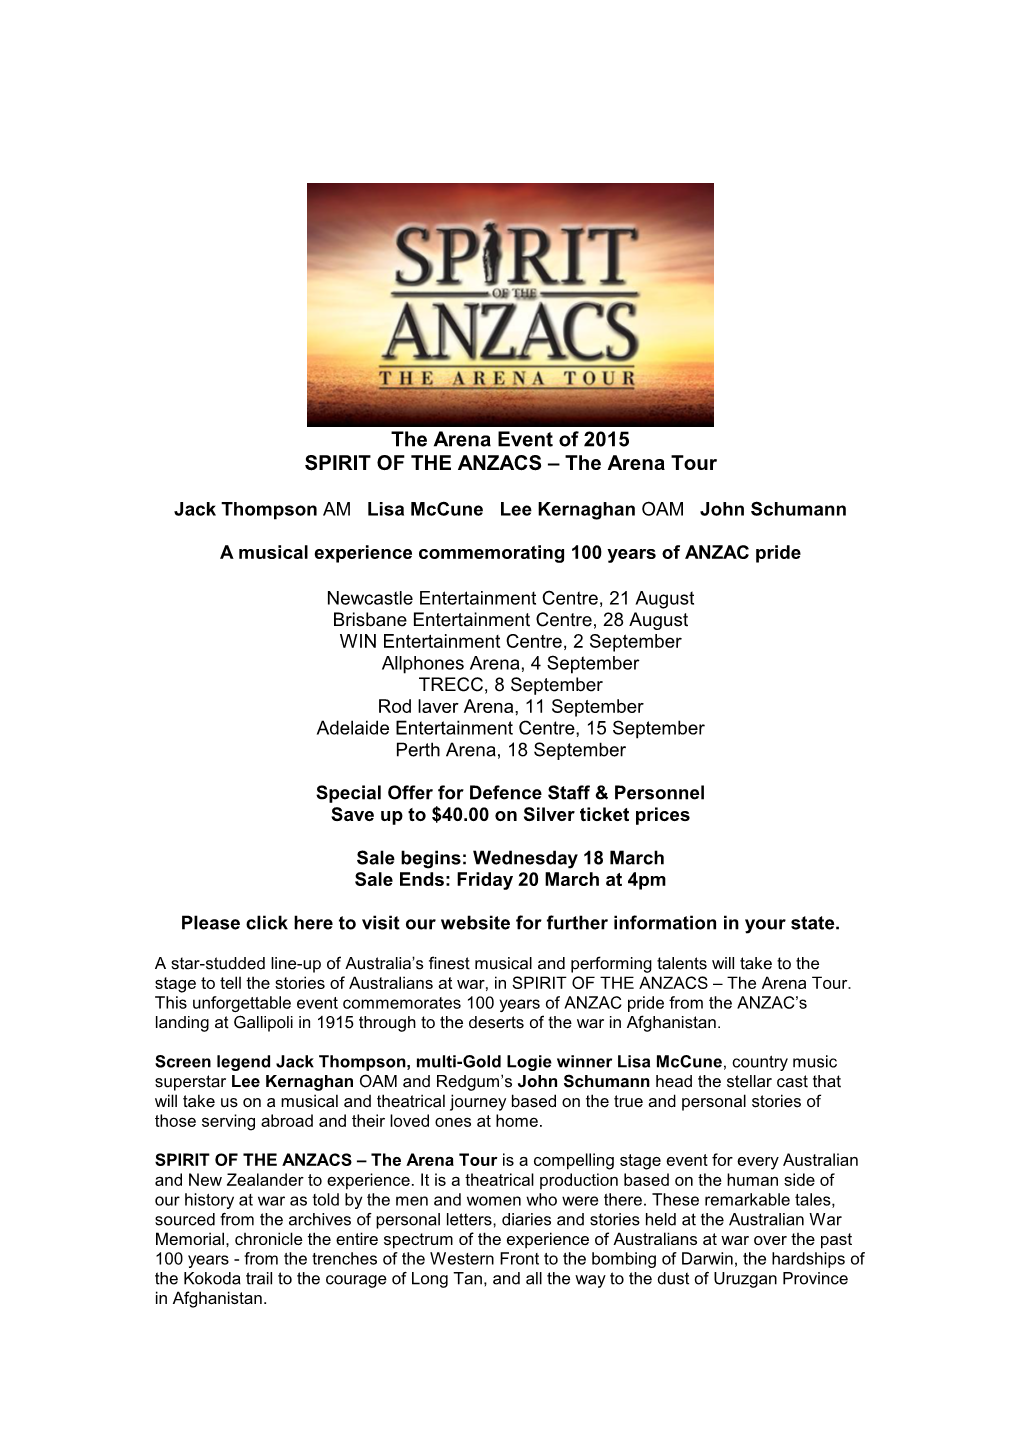 The Arena Event of 2015 SPIRIT of the ANZACS – the Arena Tour